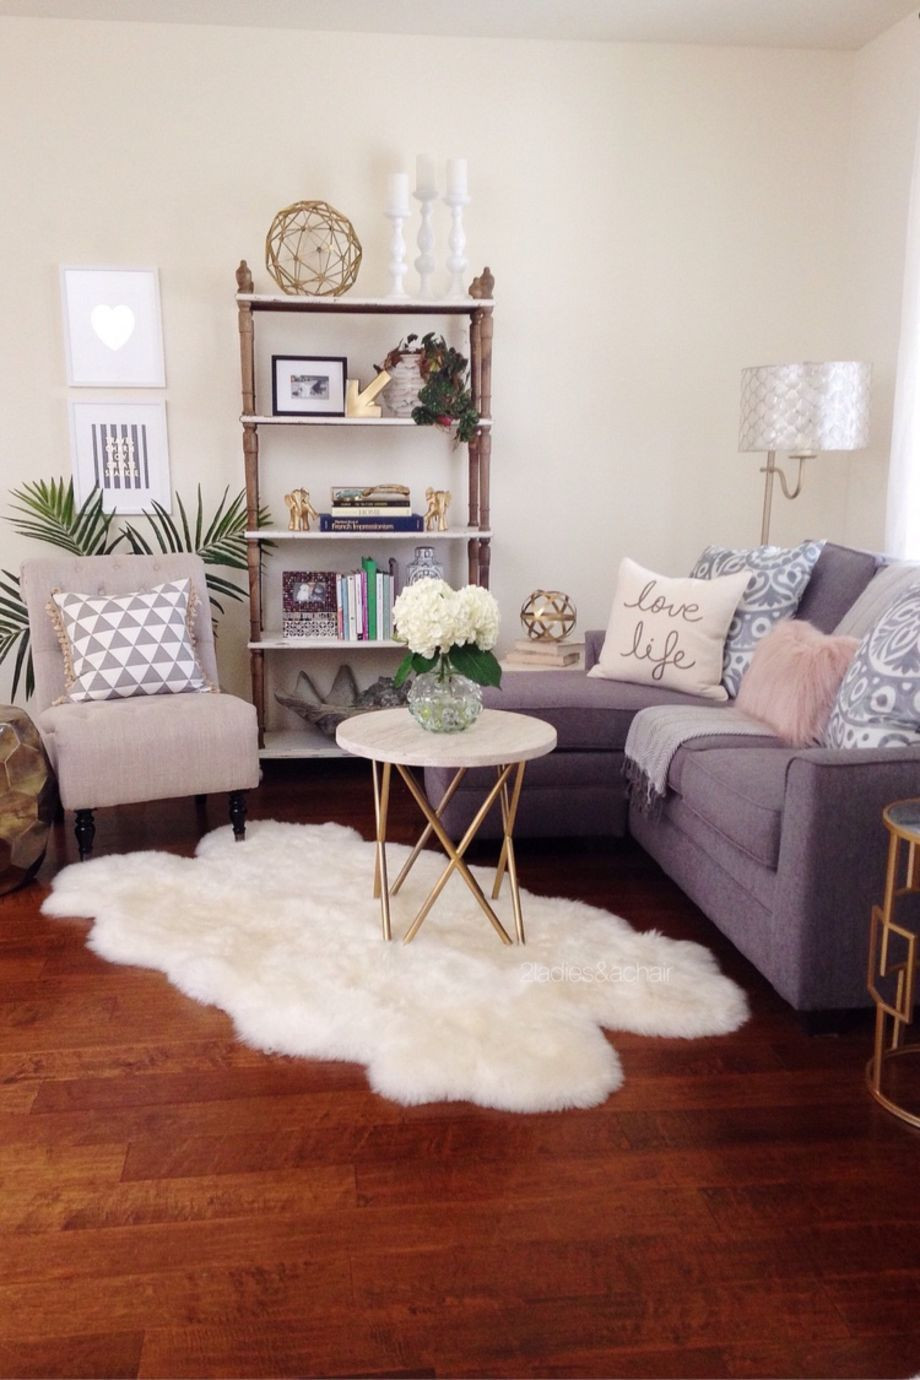 Studio Apartment Living Room Ideas
 Pin by Lydia Lucas on New Place